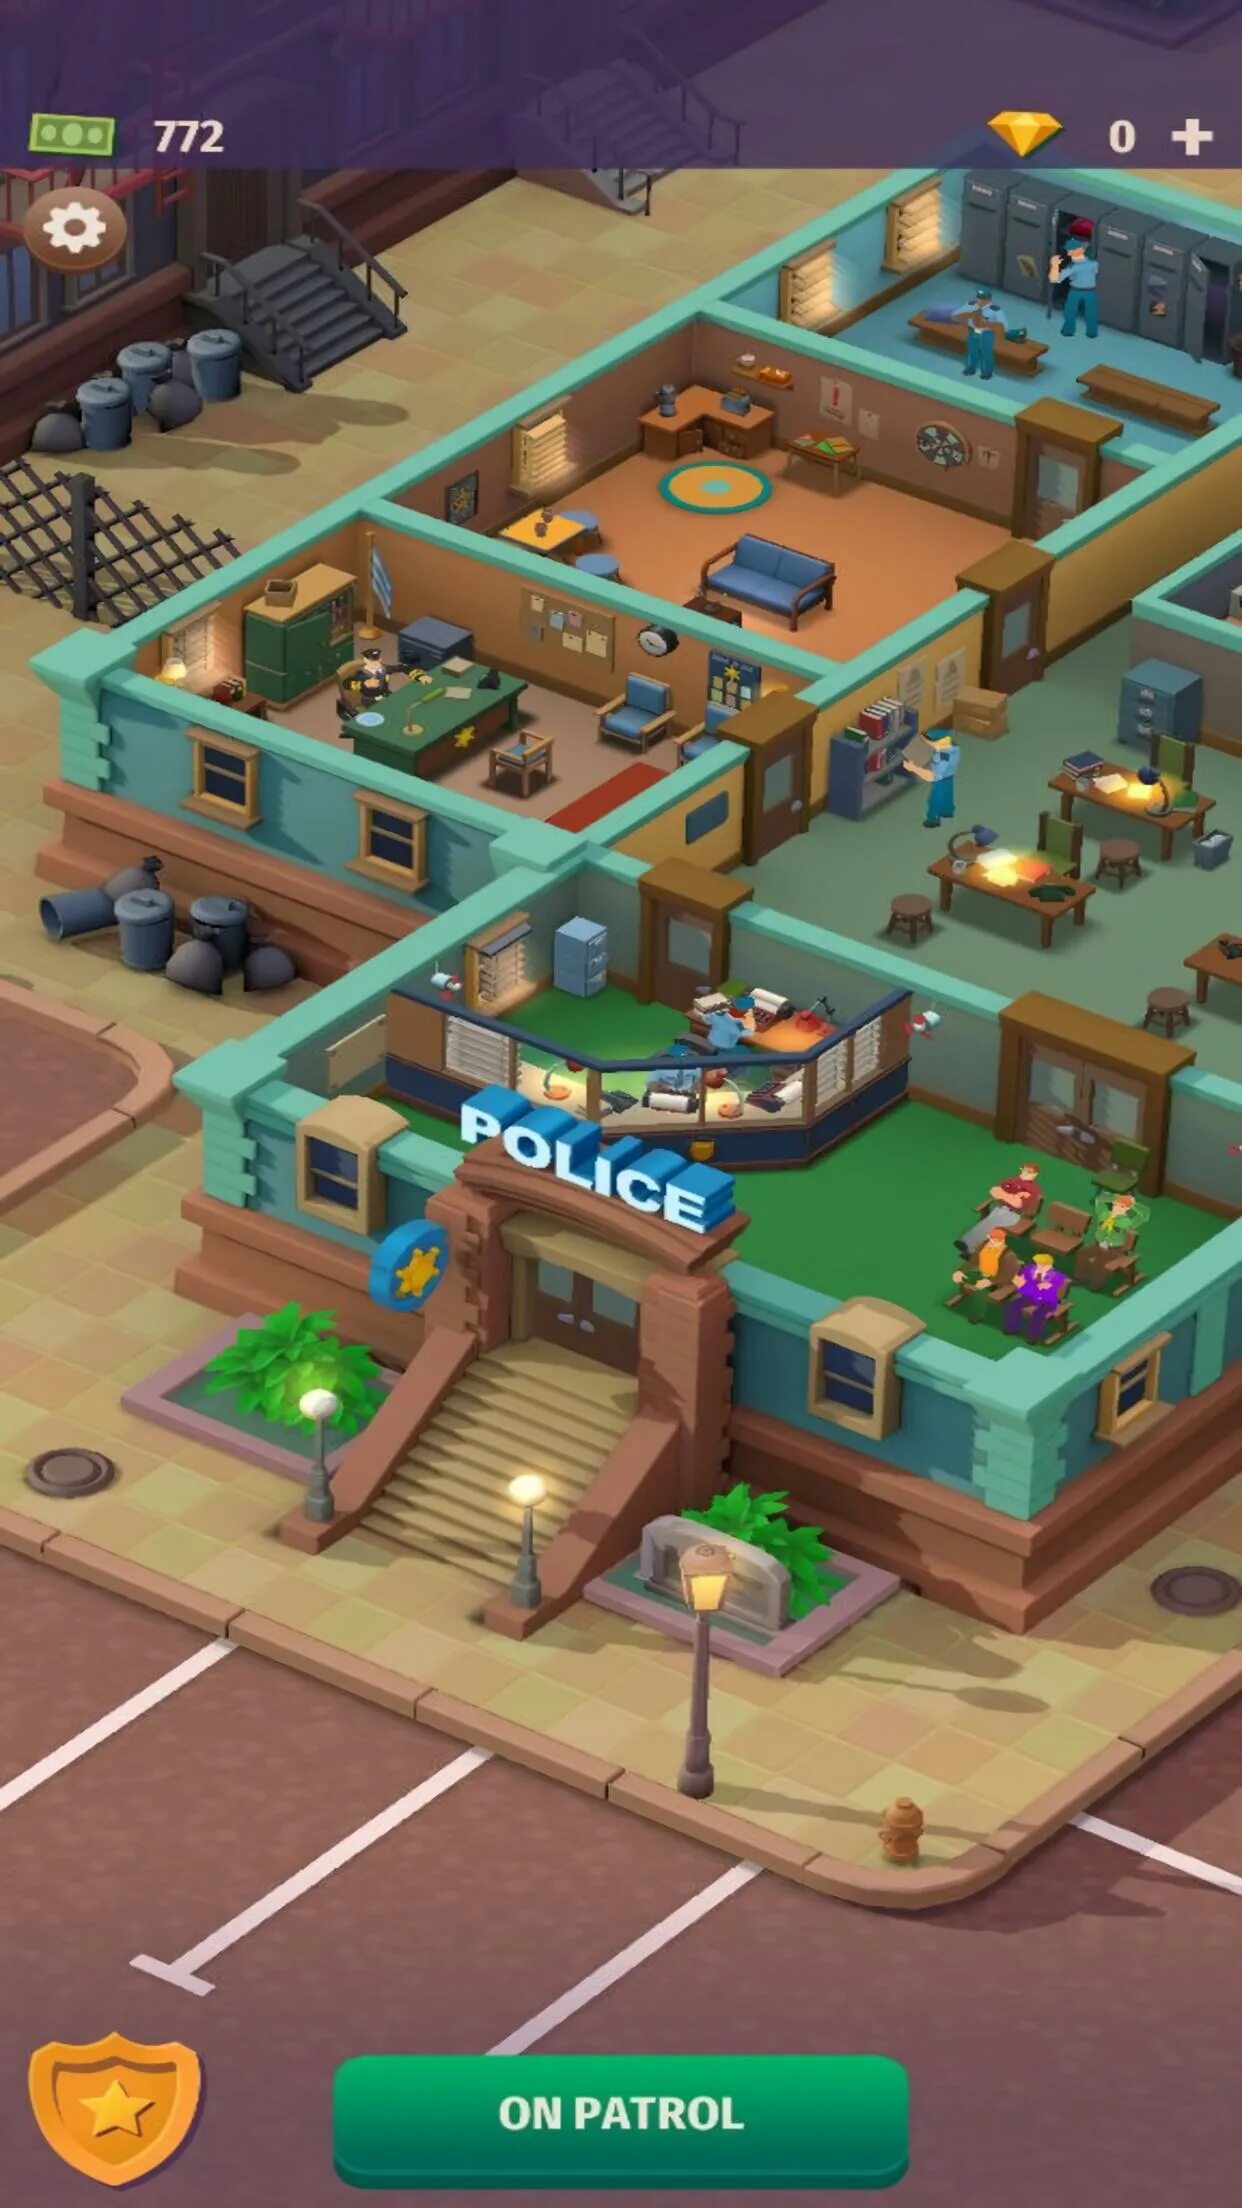 Police department tycoon mod. Игра полицейский участок. Police Station Tycoon. Взлома Idle Police Tycoon Police game. Полицейский участок игры зайчика.